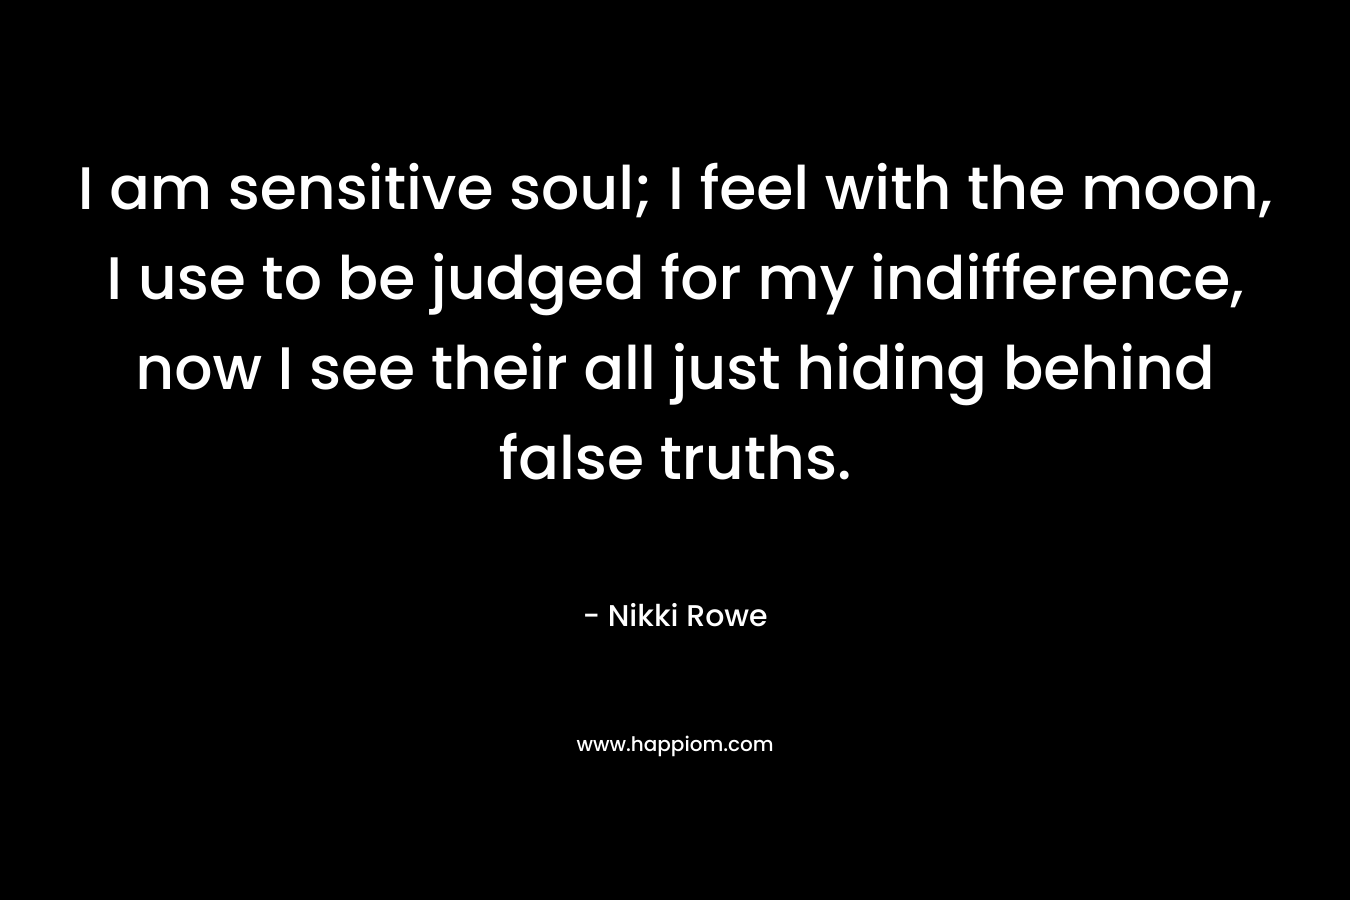 I am sensitive soul; I feel with the moon, I use to be judged for my indifference, now I see their all just hiding behind false truths. – Nikki Rowe